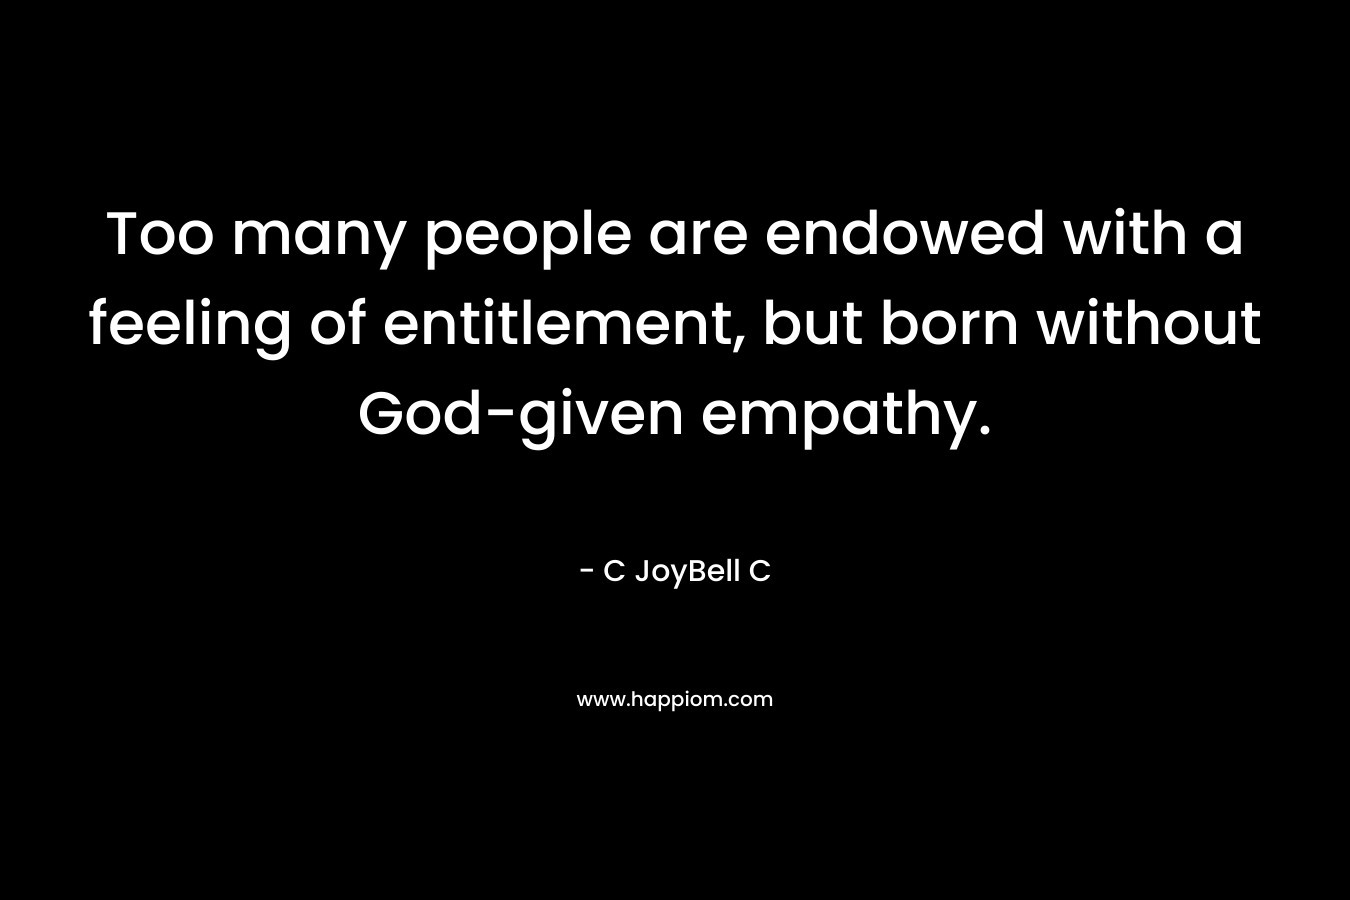 Too many people are endowed with a feeling of entitlement, but born without God-given empathy.